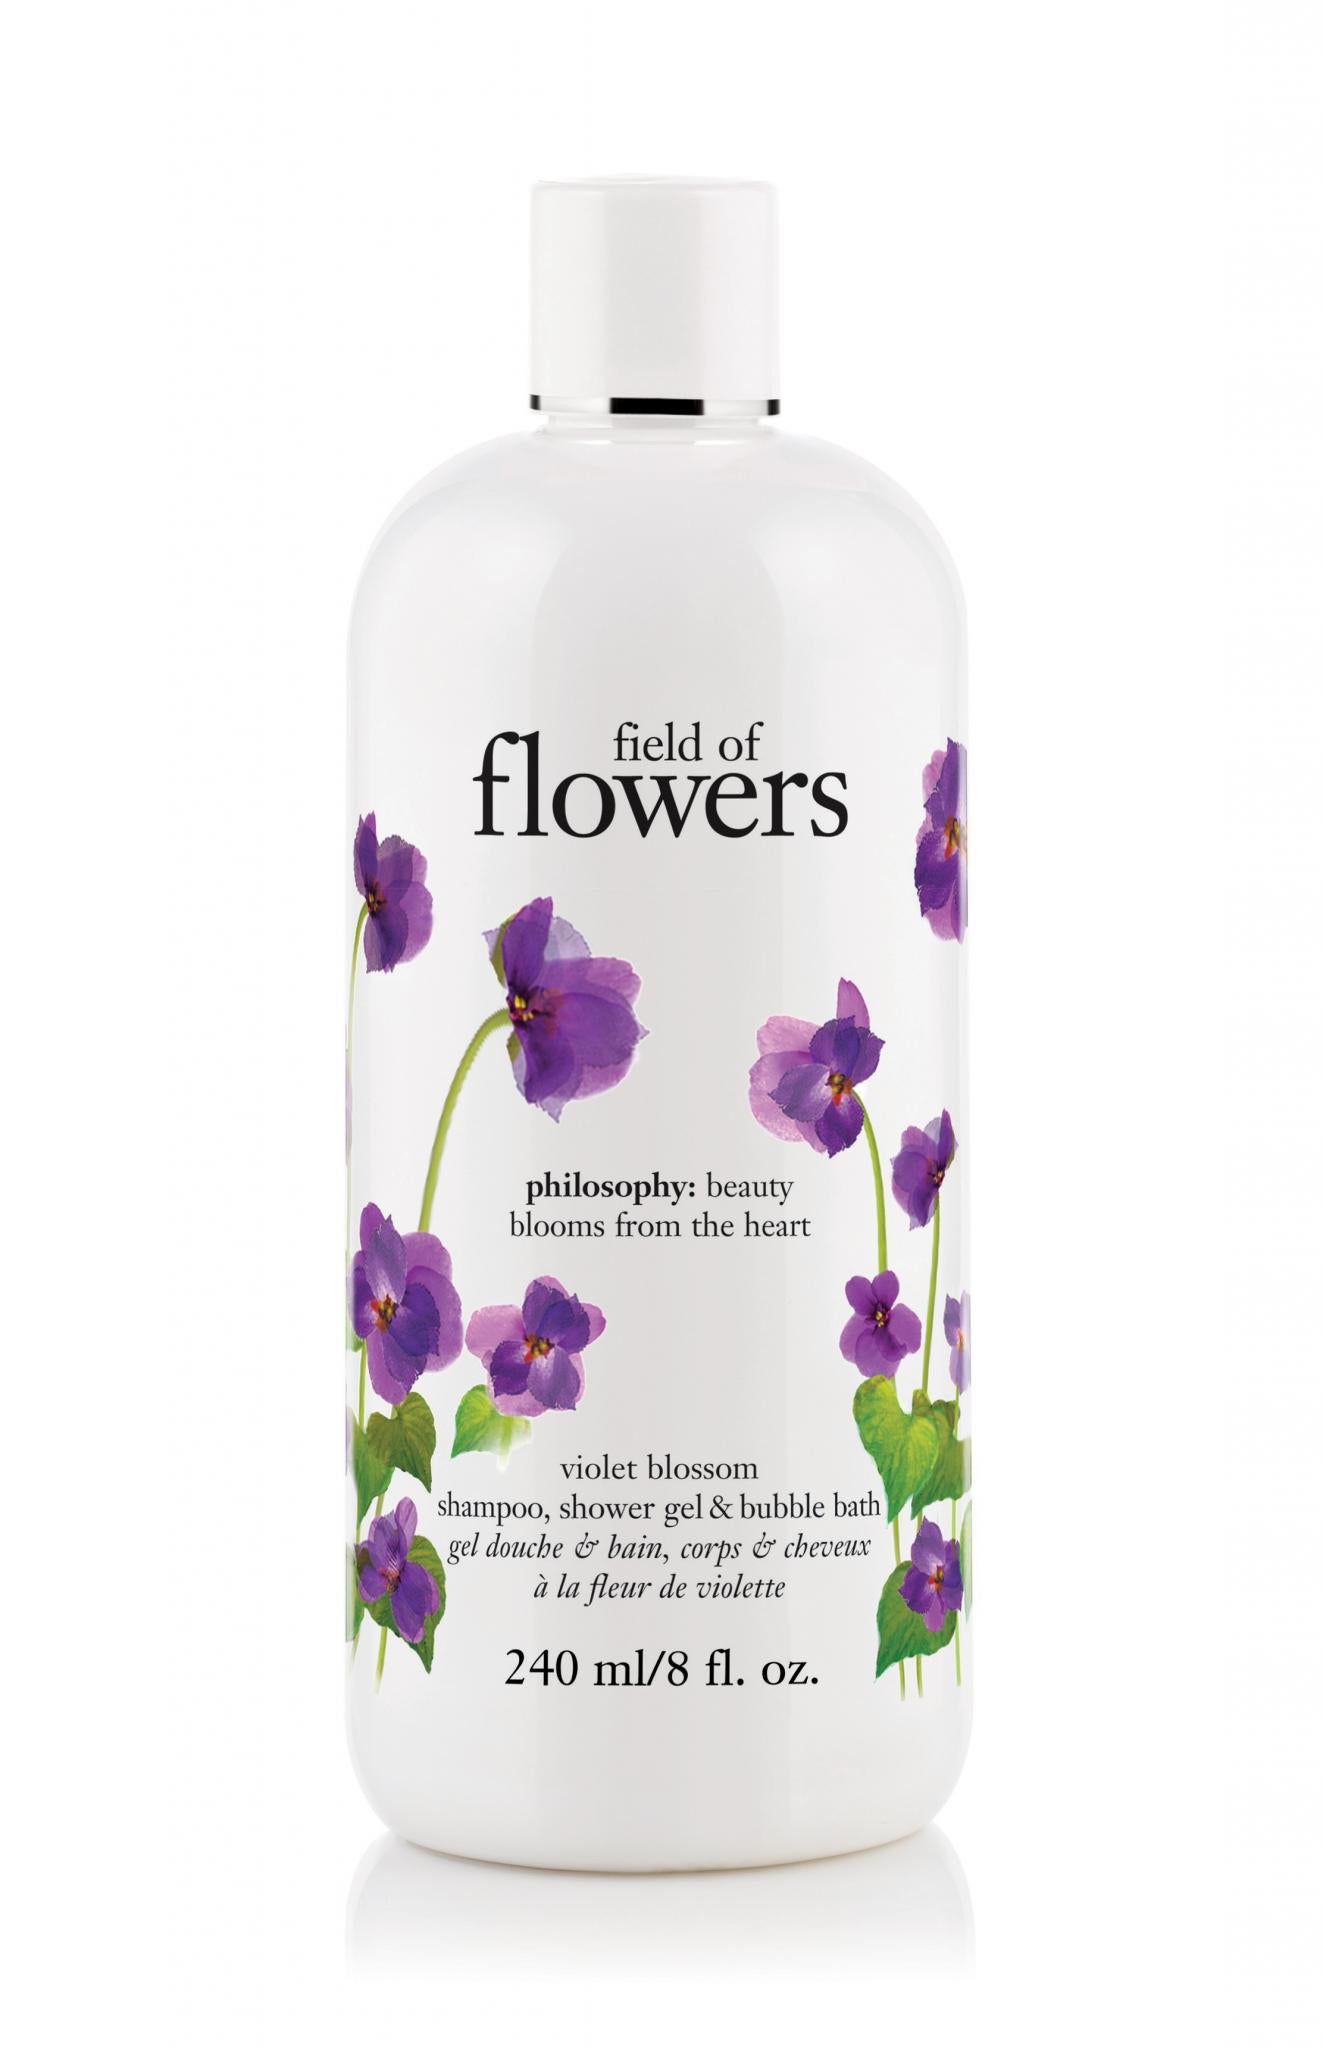 1 Product, 3 Ways: Philosophy Field of Flowers Violet Blossom